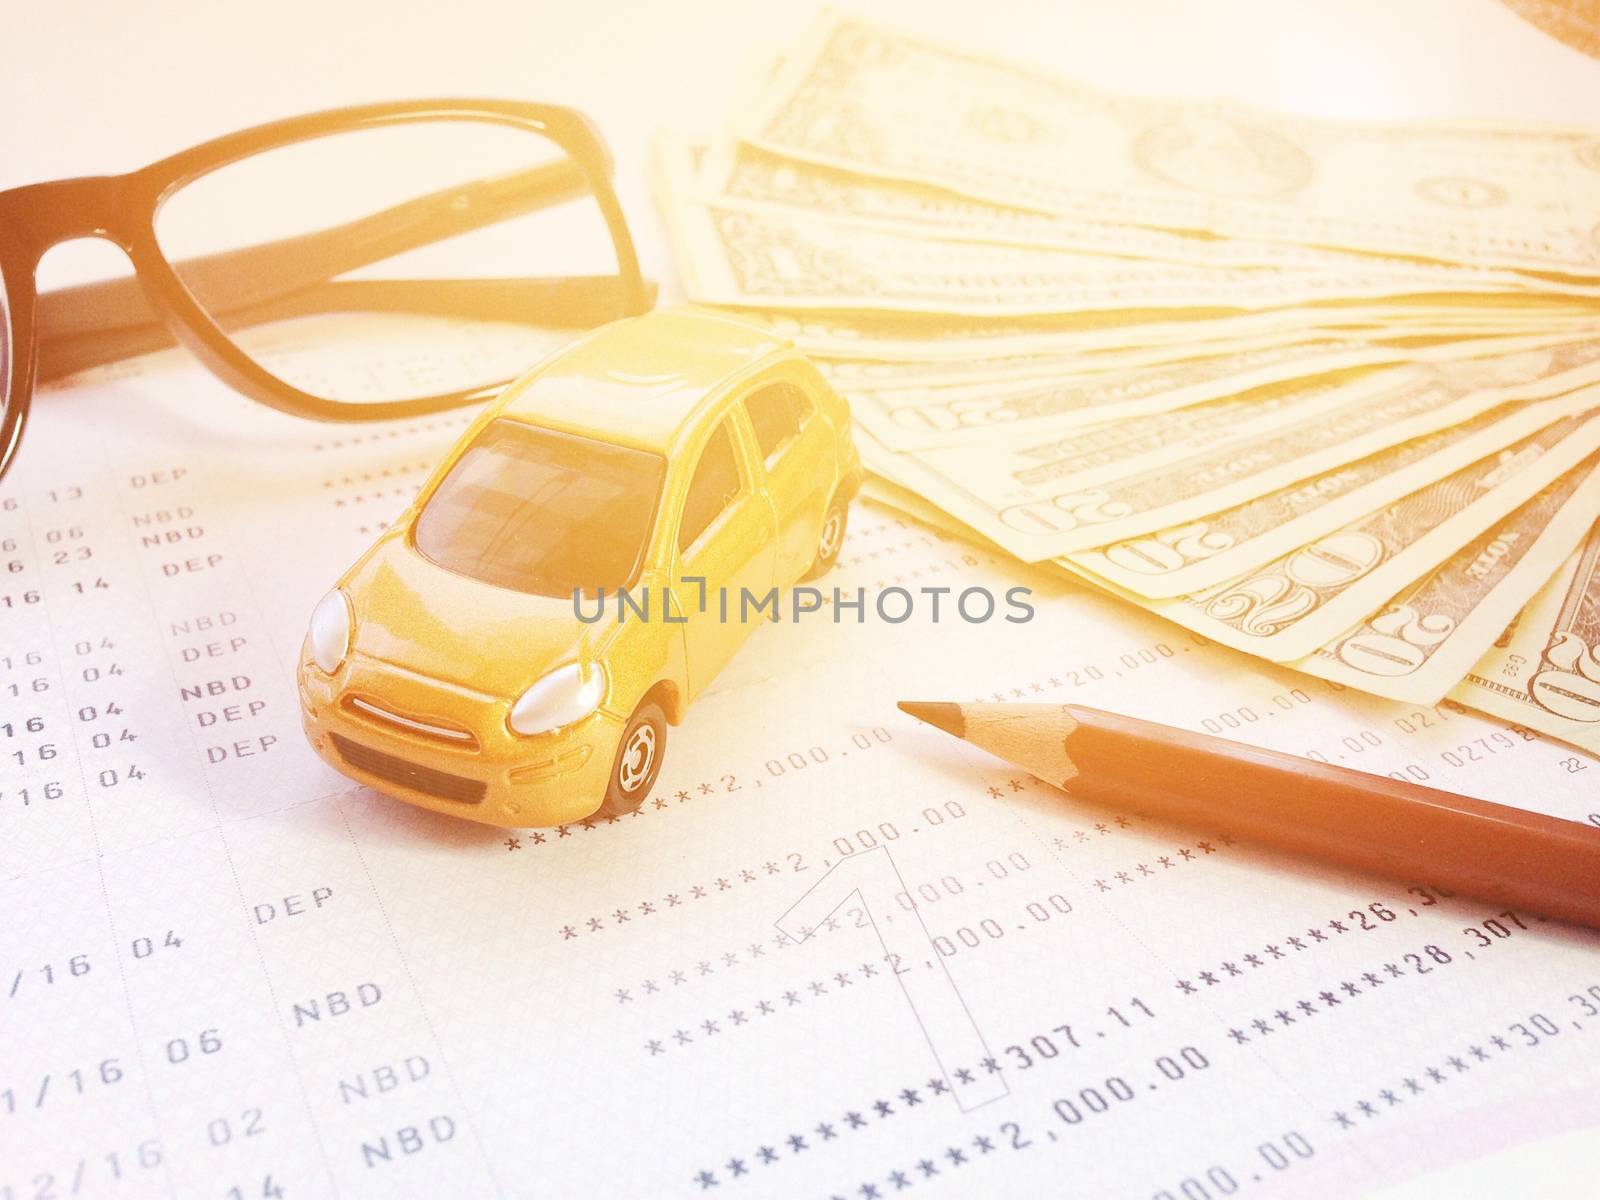 Business, finance, savings, banking or car loan concept : Miniature car model, pencil, eyeglasses, money and savings account passbook or financial statement on white background